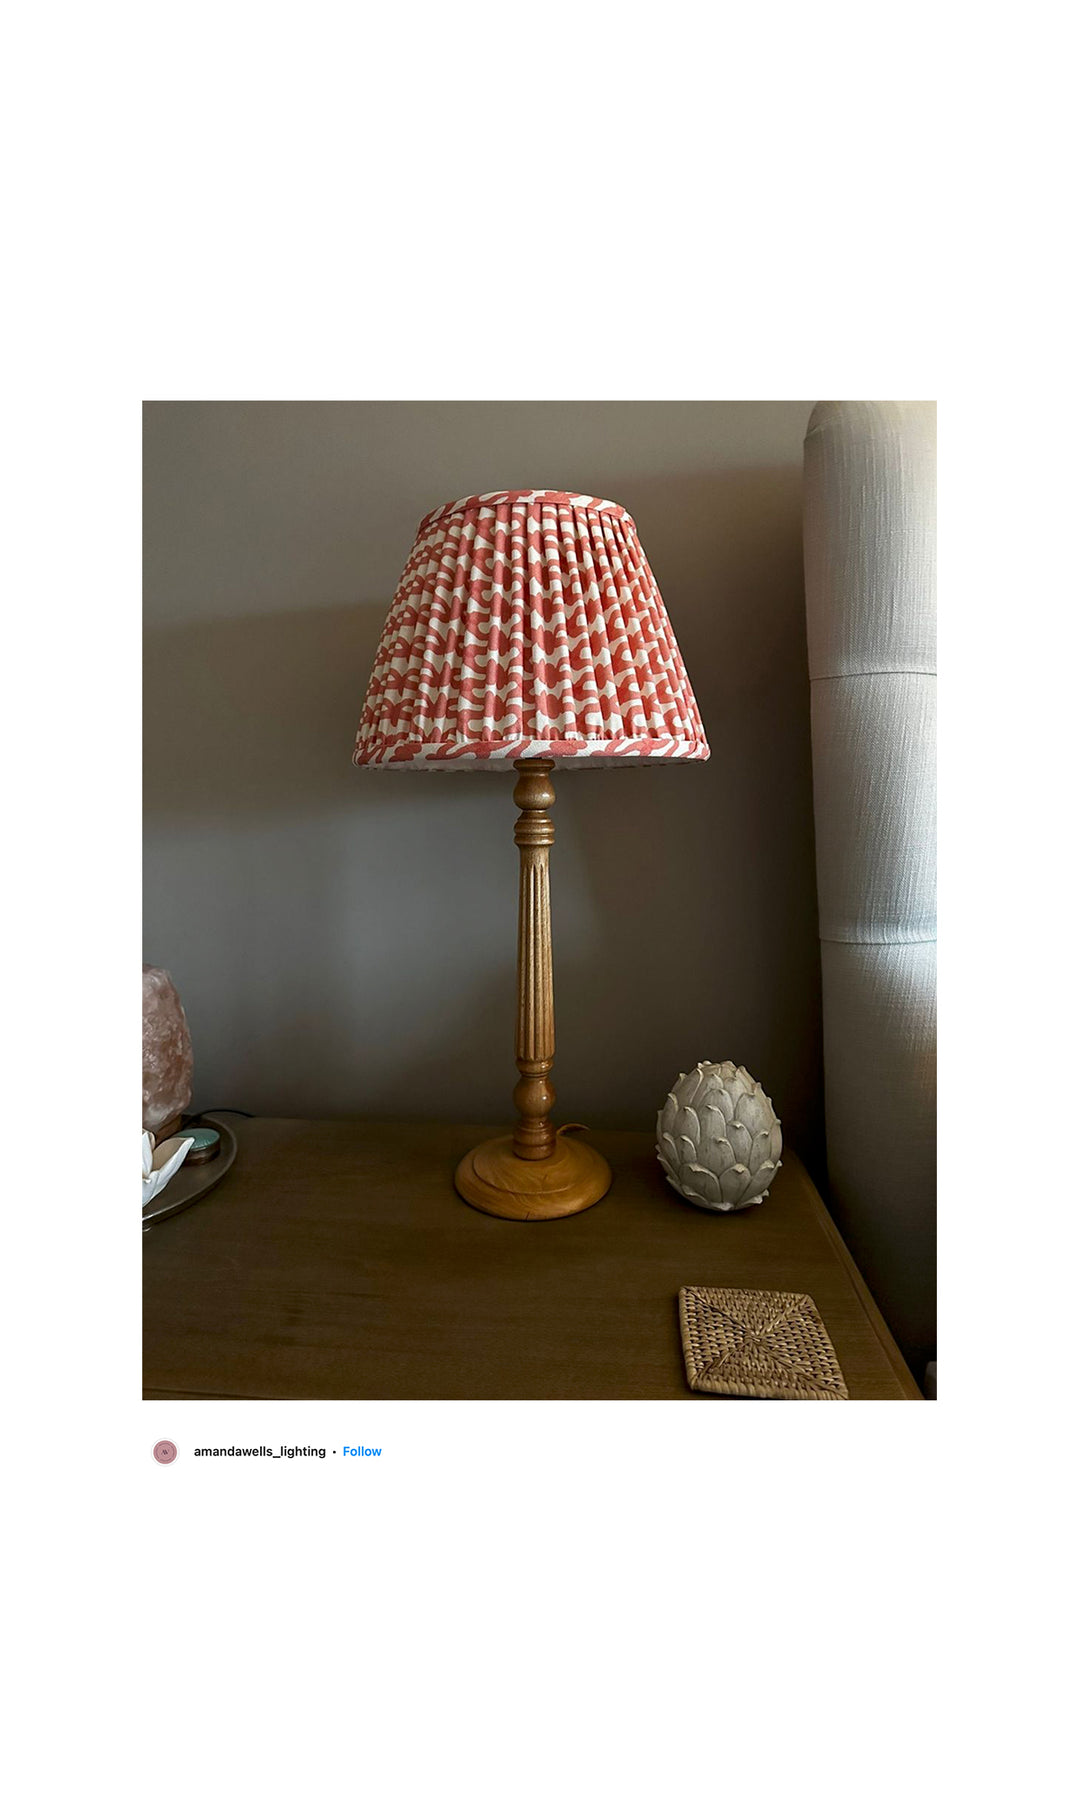 Knot tom tom lampshade